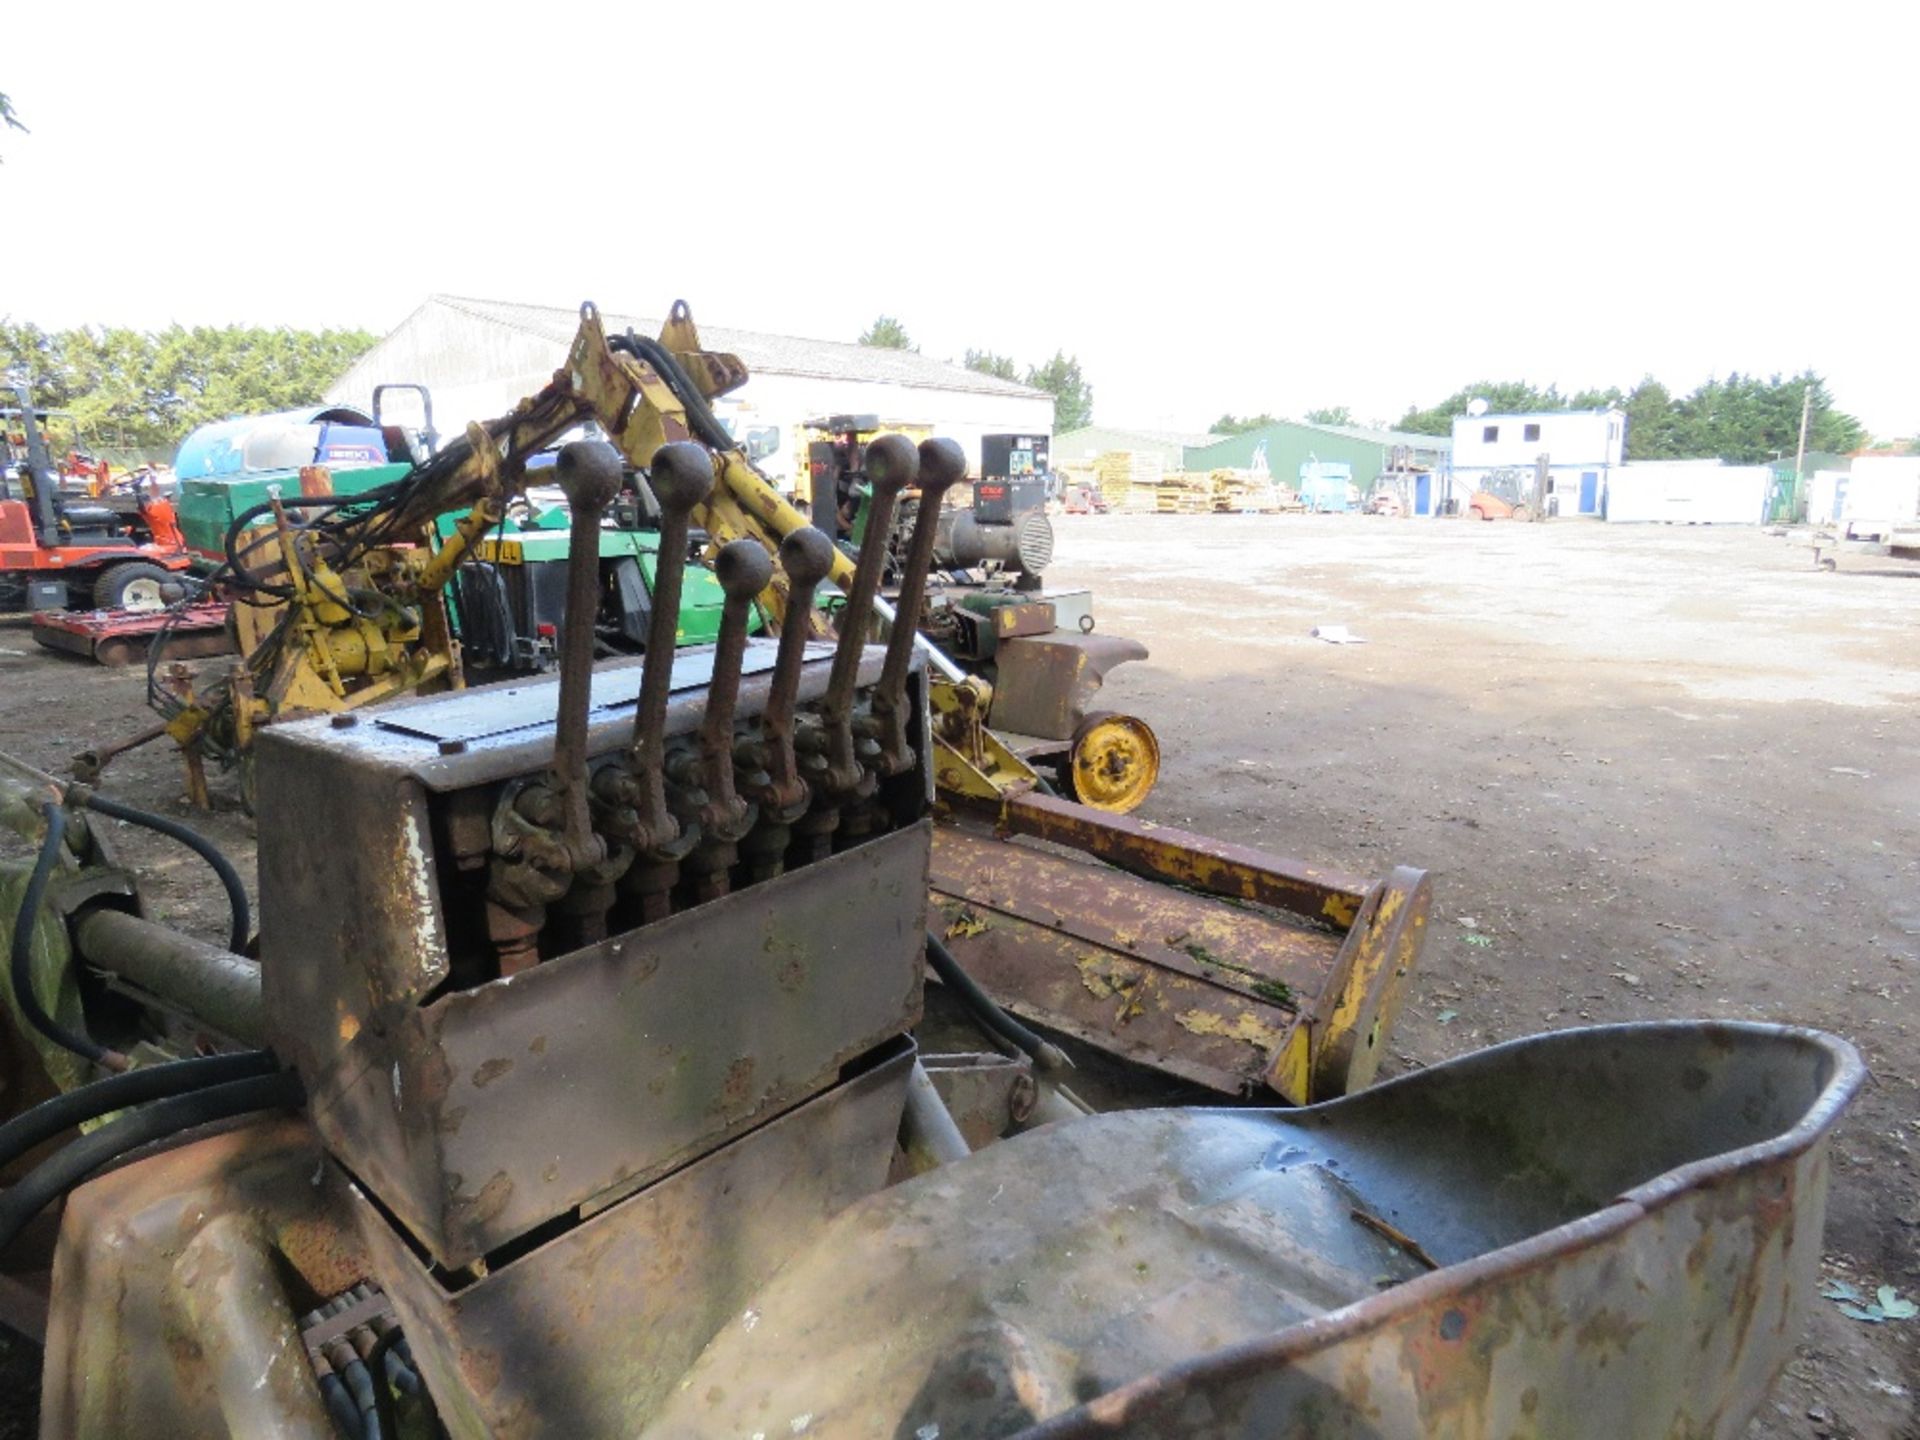 DAVID BROWN 3 POINT LINKAGE MOUNTED BACK ACTOR UNIT C/W 2 X BUCKETS - Image 3 of 7